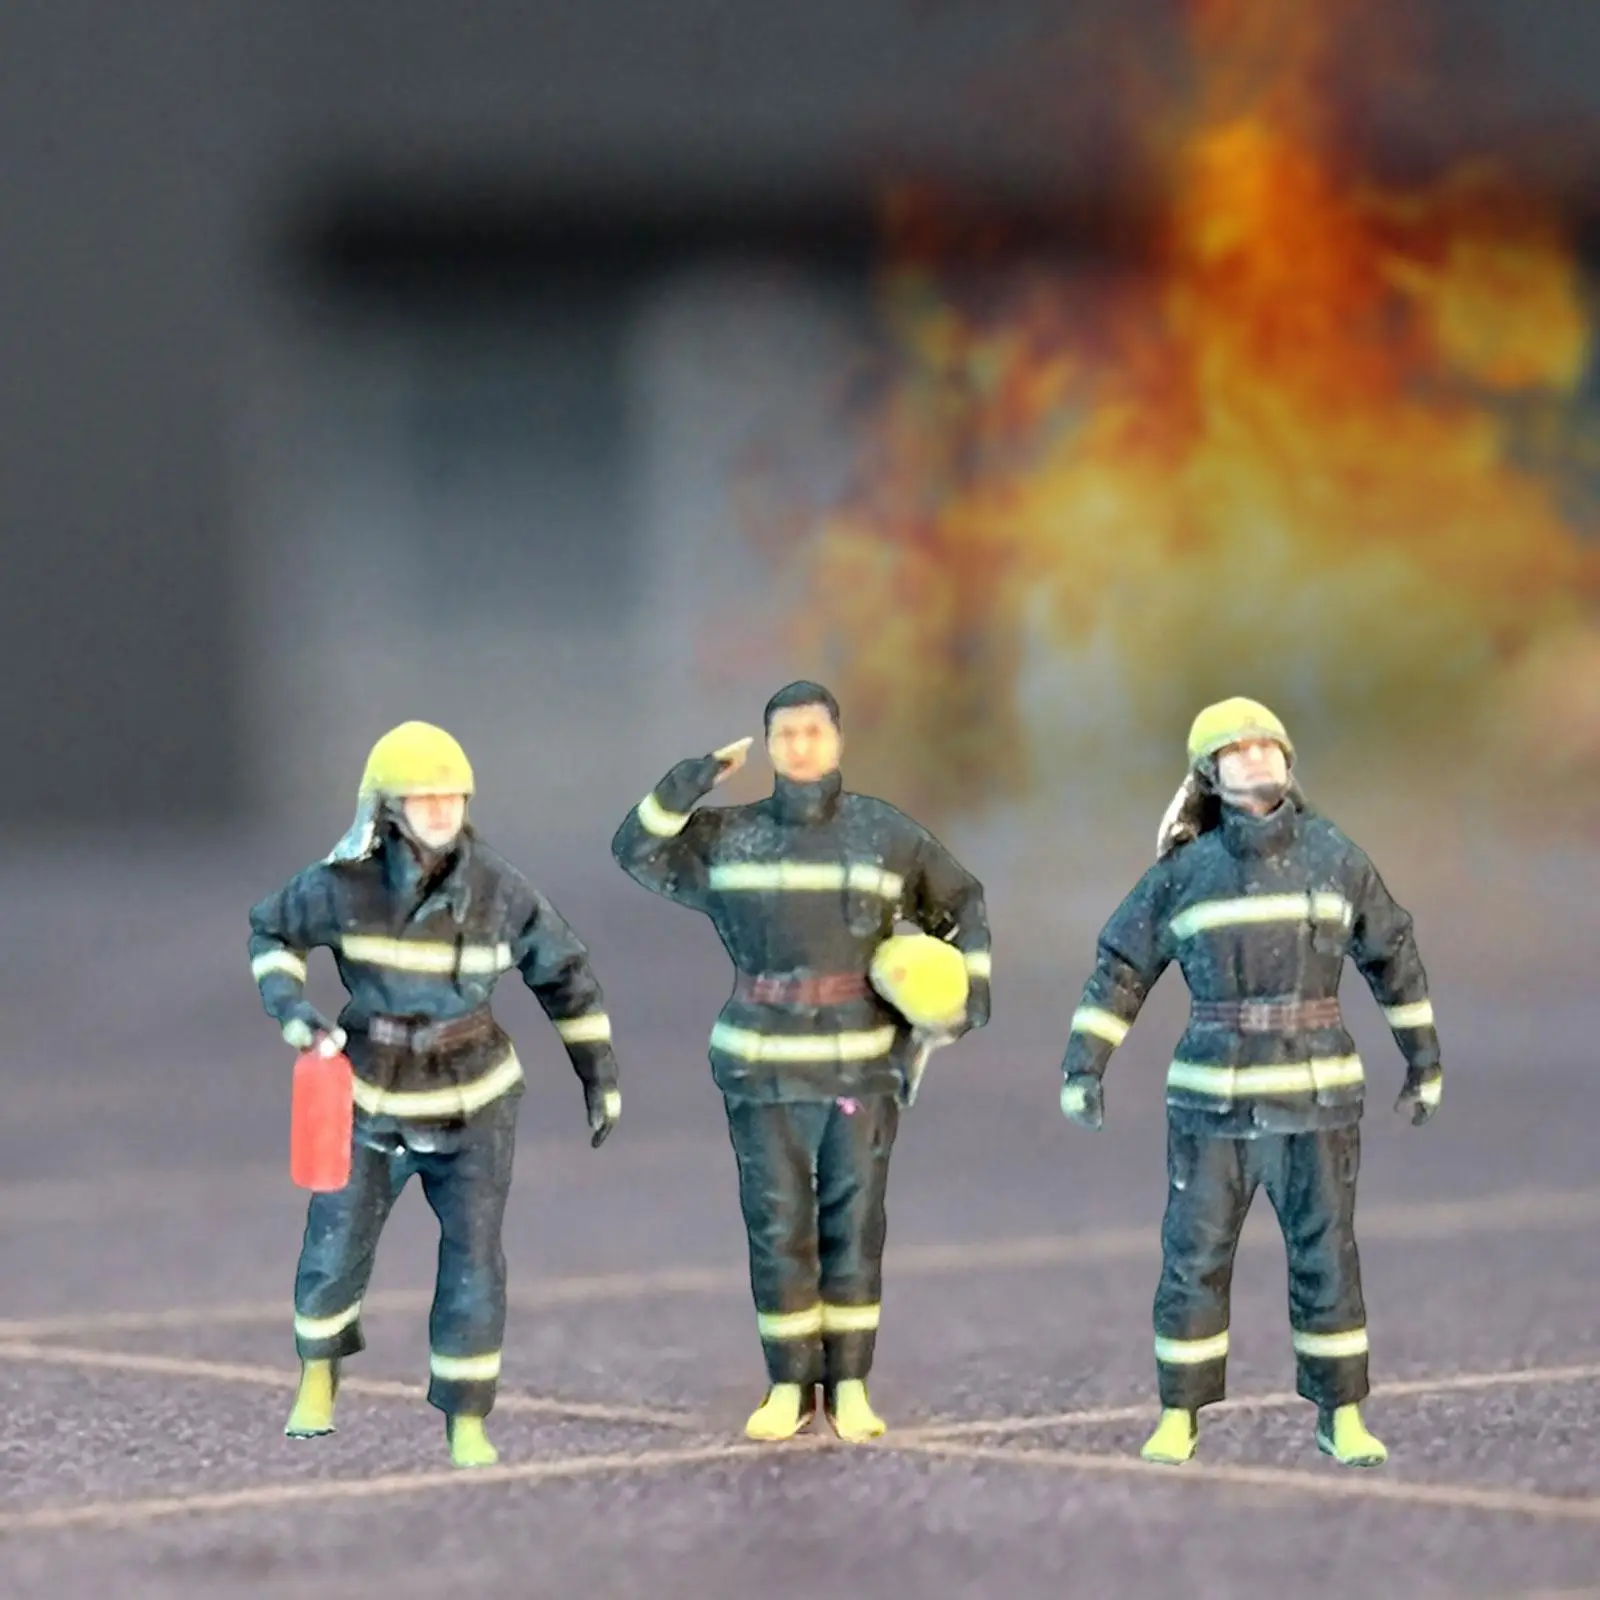 Miniature 1:64 Firefighter Figures Diorama Action Figures for Micro Landscapes Diorama Photography Props Building Accessories